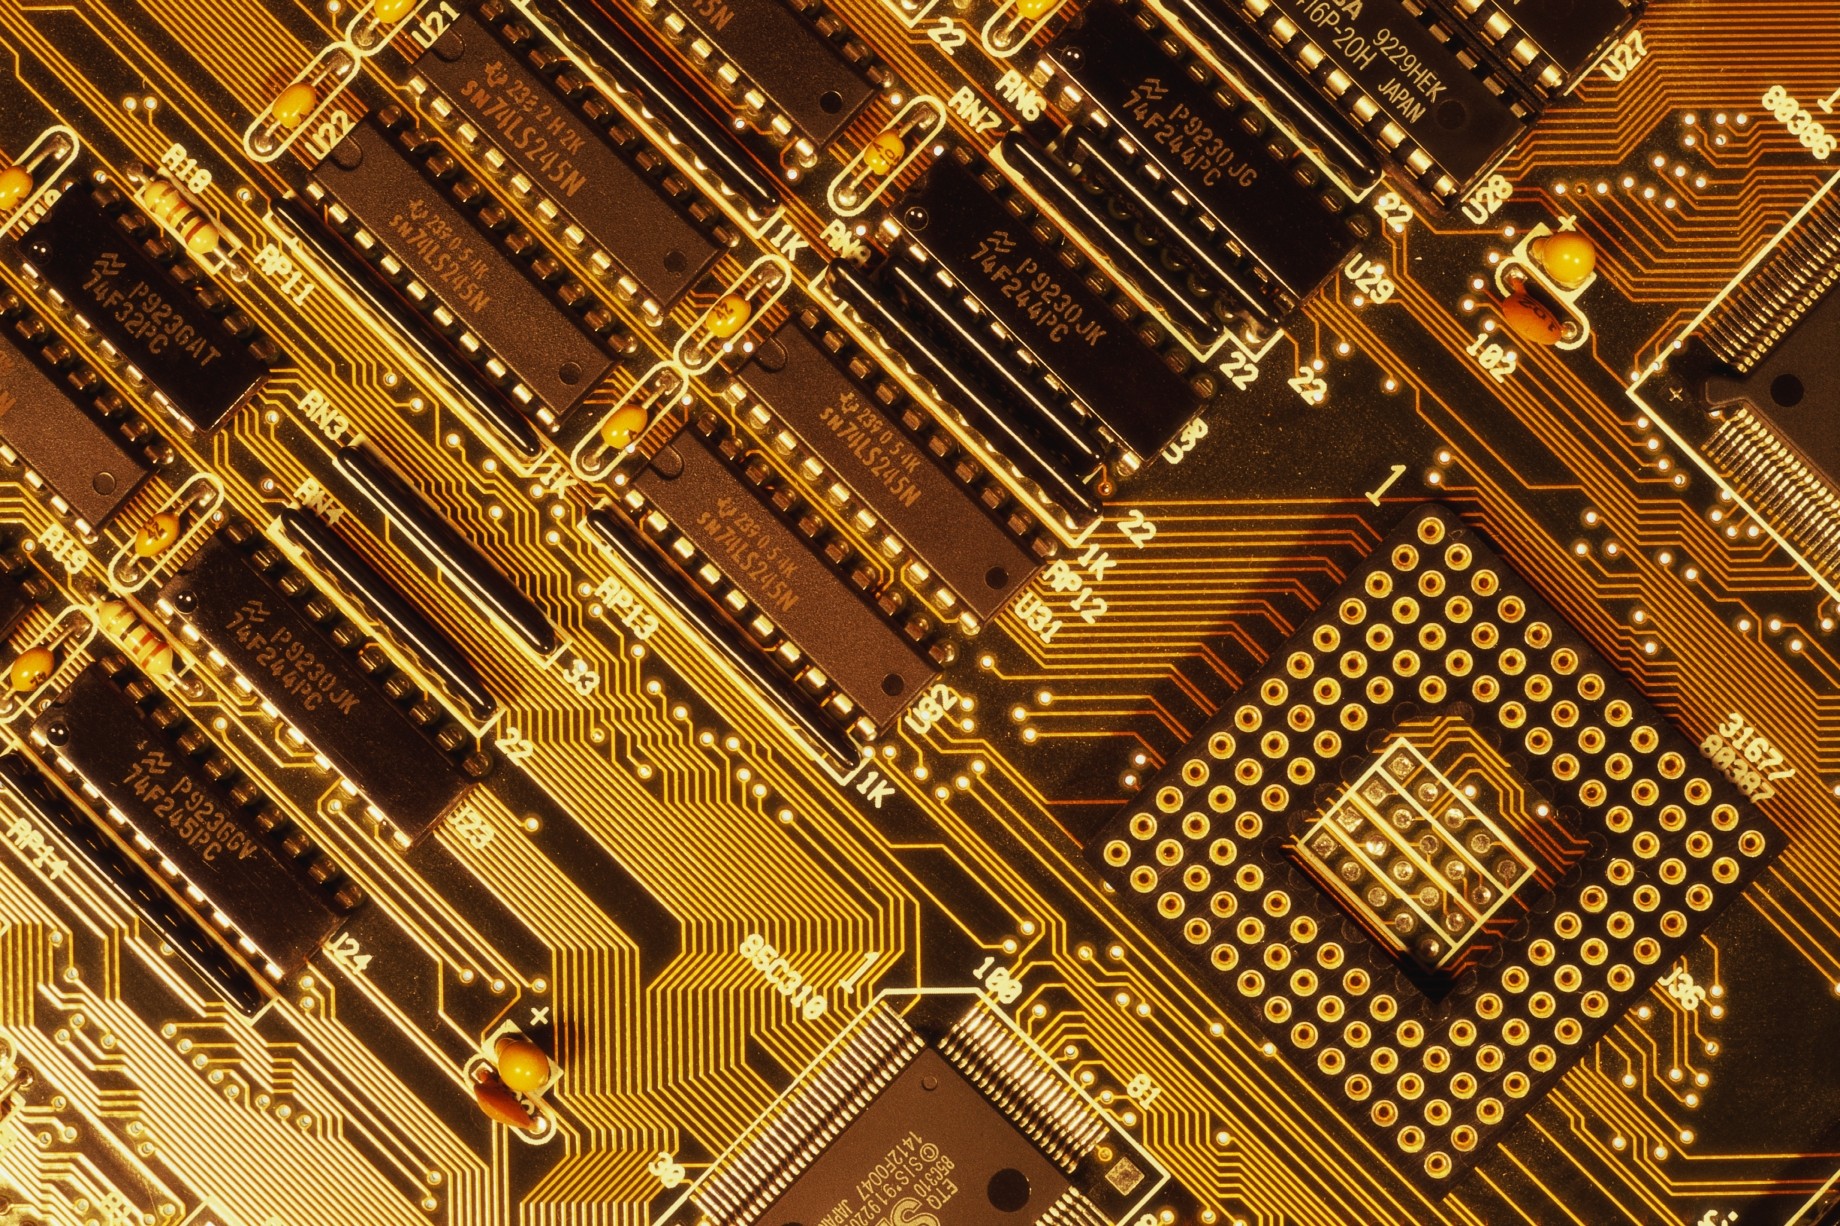 tight zoom on motherboard with chips and memory